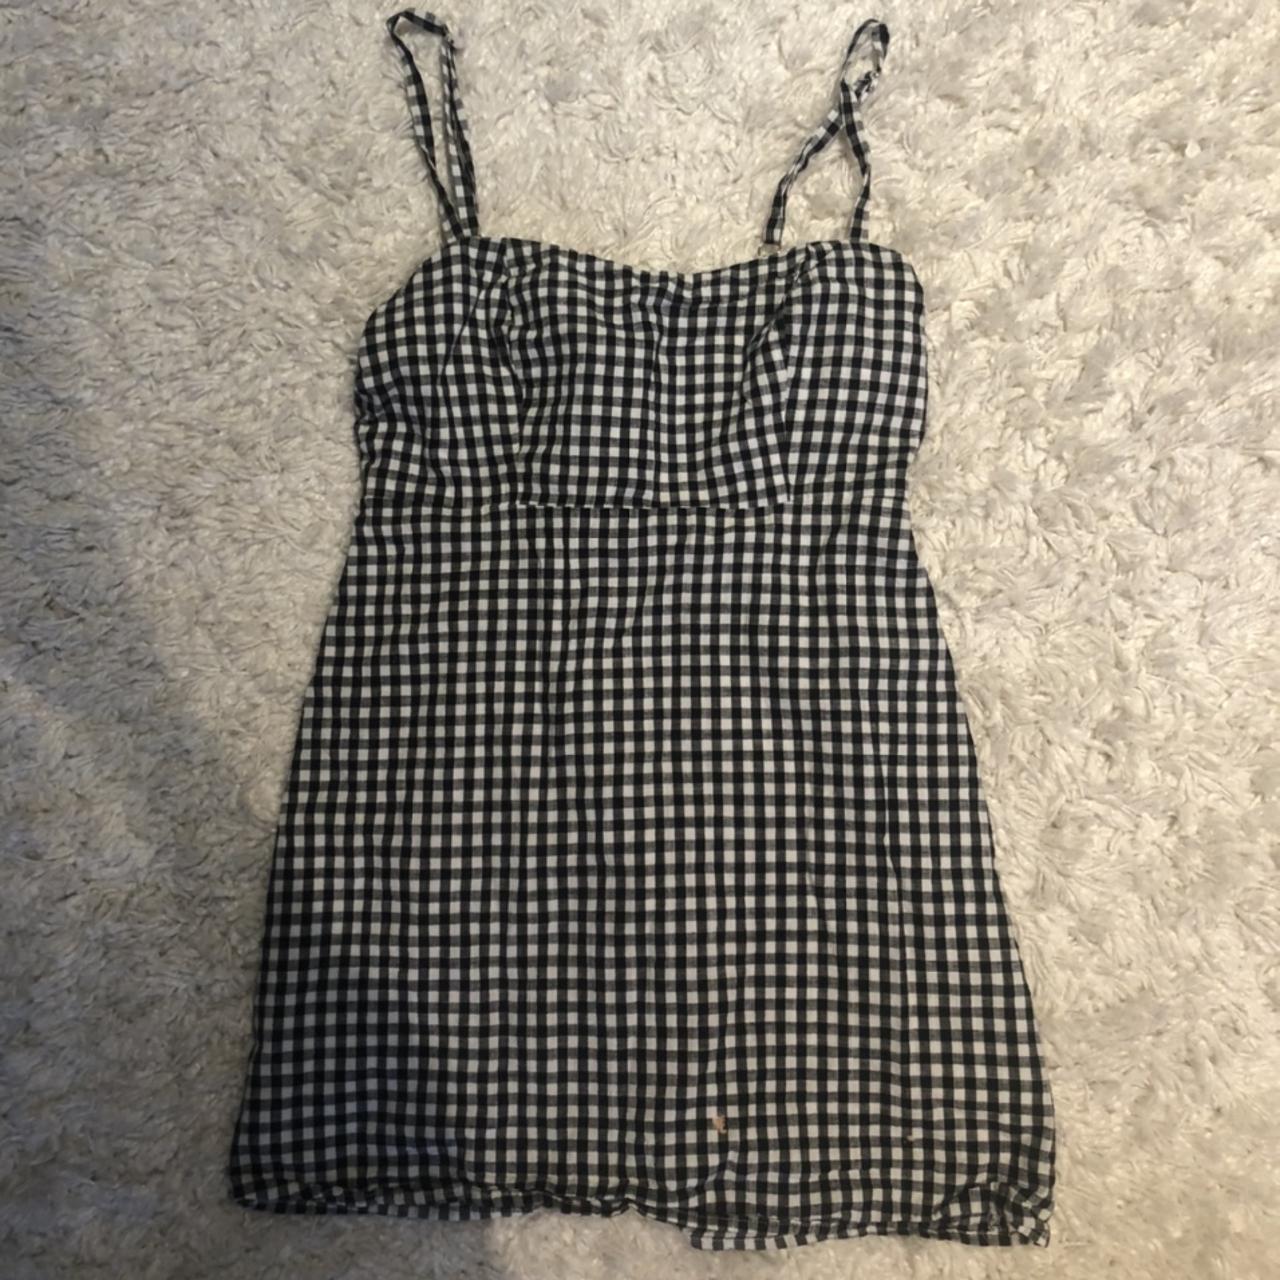 Brandy Melville Gingham Dress! So cute and perfect... - Depop